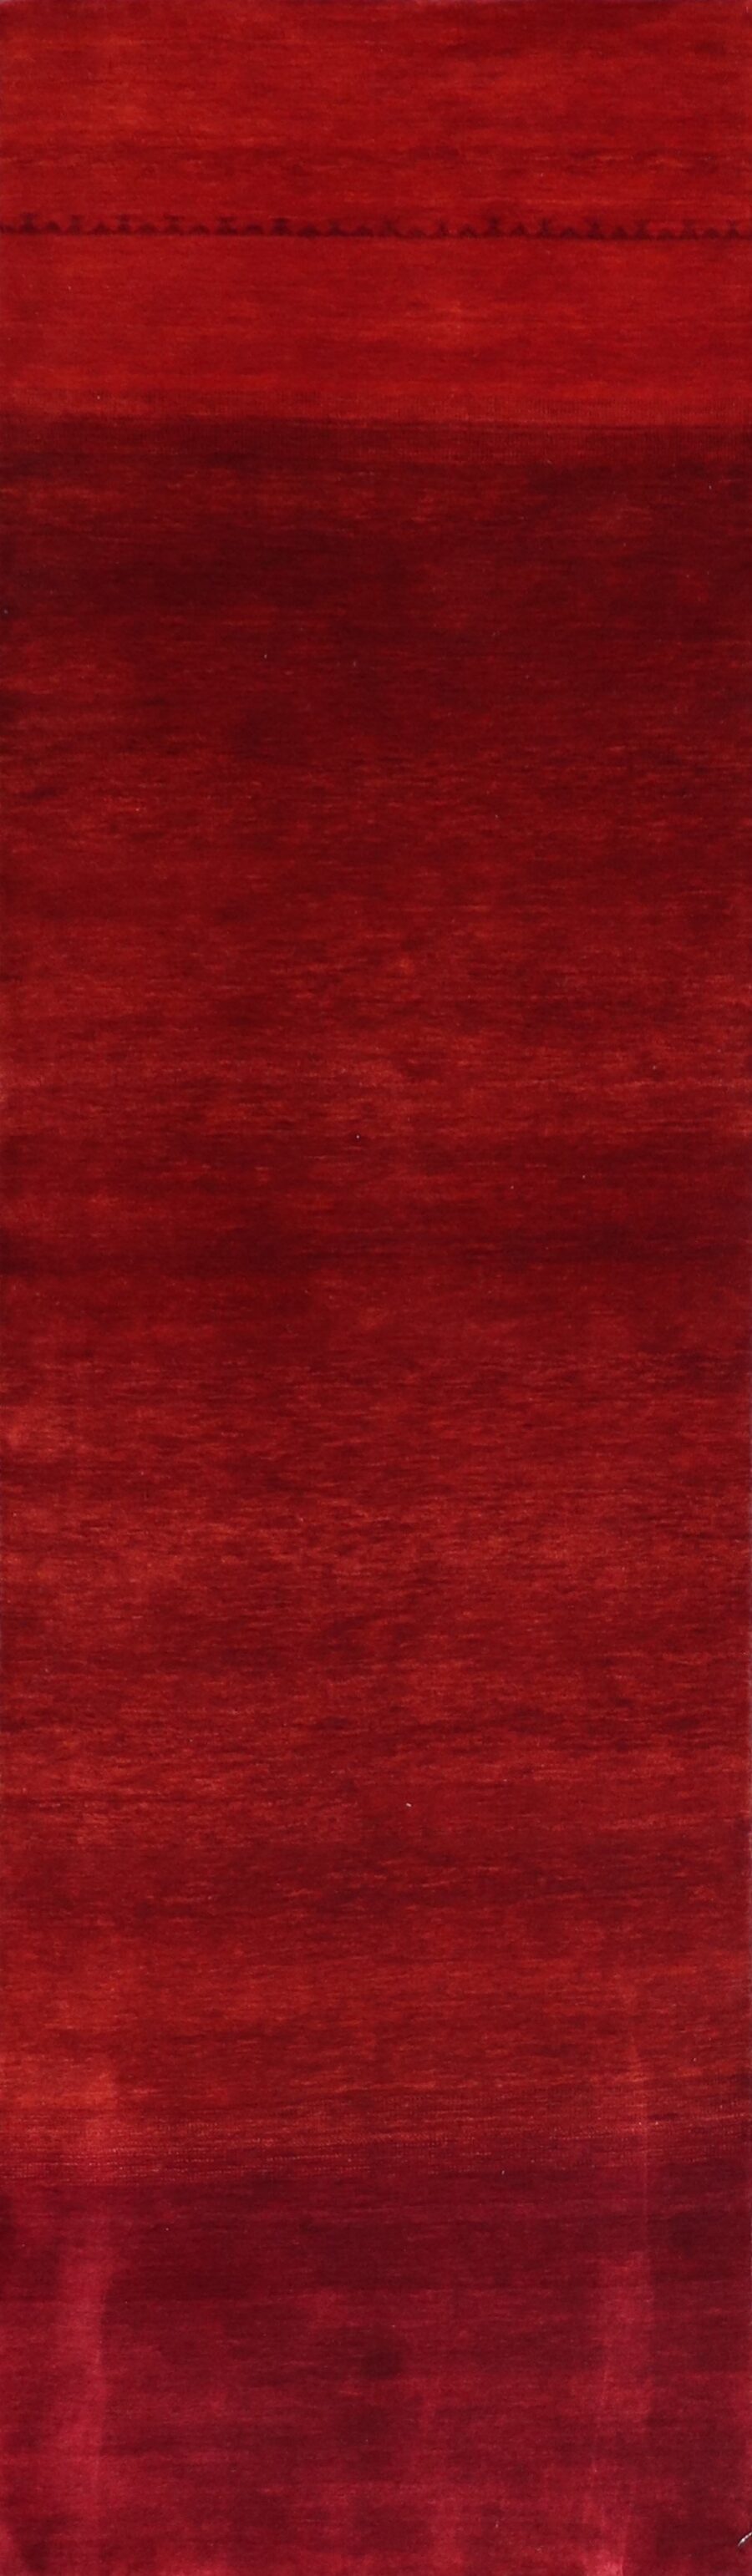 2’7”x9’9” Contemporary Red&Burgundy Wool Hand-Knotted Rug - Direct Rug Import | Rugs in Chicago, Indiana,South Bend,Granger